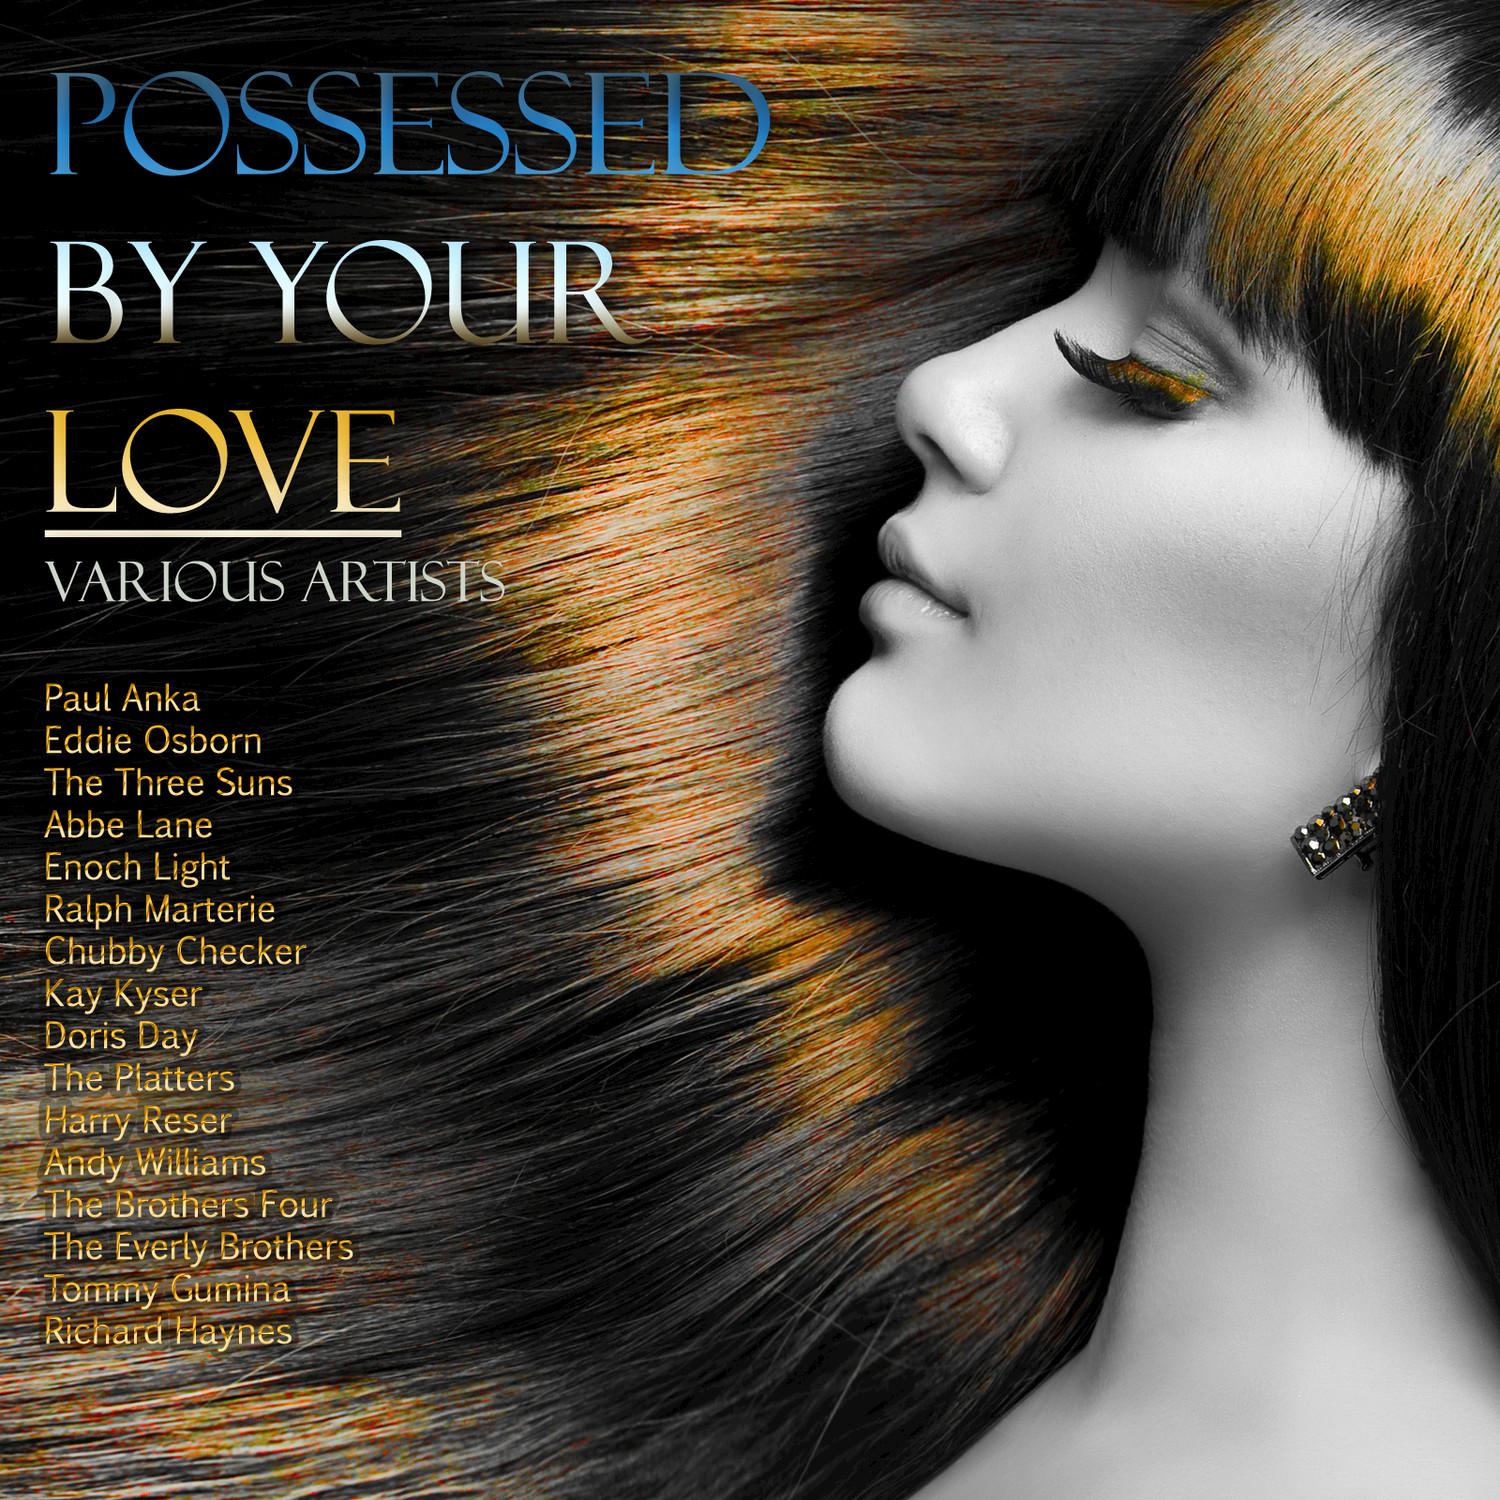 Possessed by Your Love